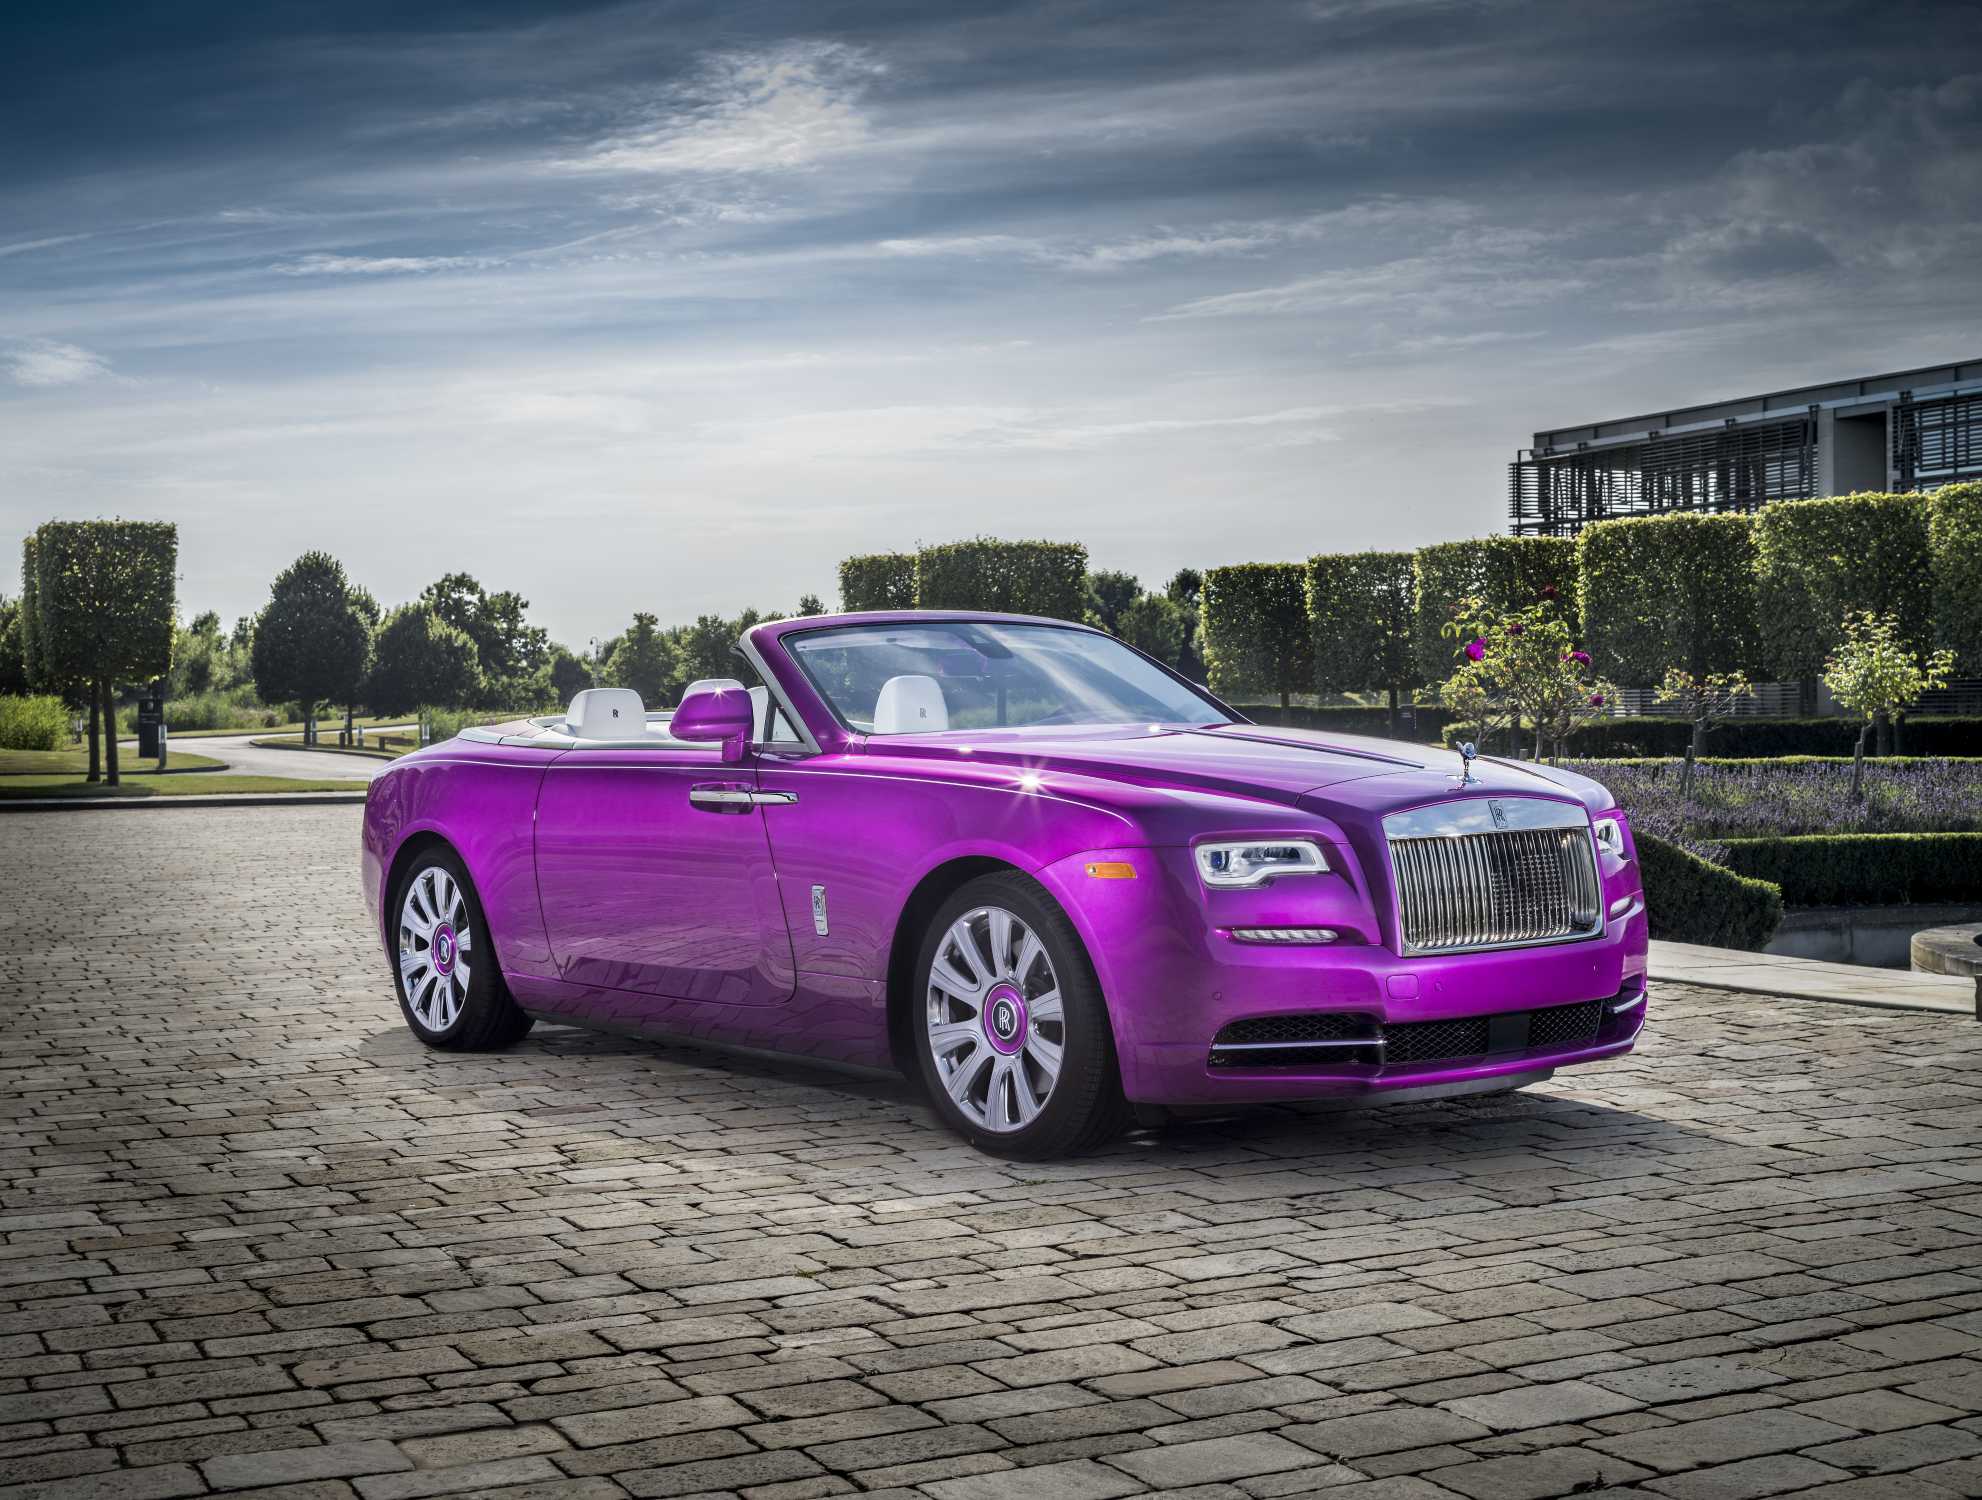 Rolls-Royce Motor Cars Delivers On A Bespoke Color Challenge Stemming From A Beautiful Flower